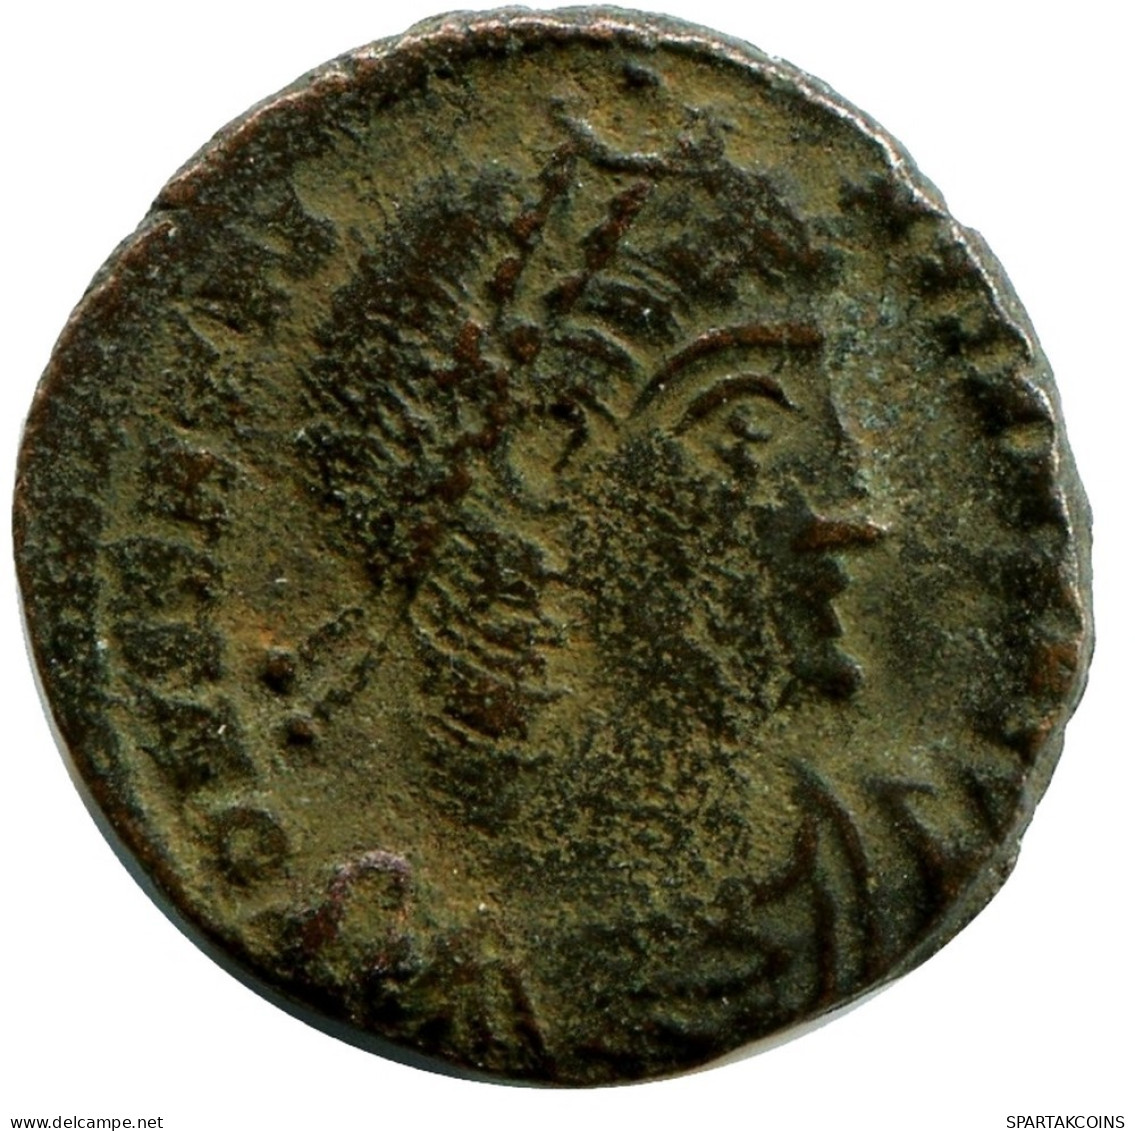 CONSTANTINE I MINTED IN CYZICUS FROM THE ROYAL ONTARIO MUSEUM #ANC11030.14.E.A - Der Christlischen Kaiser (307 / 363)